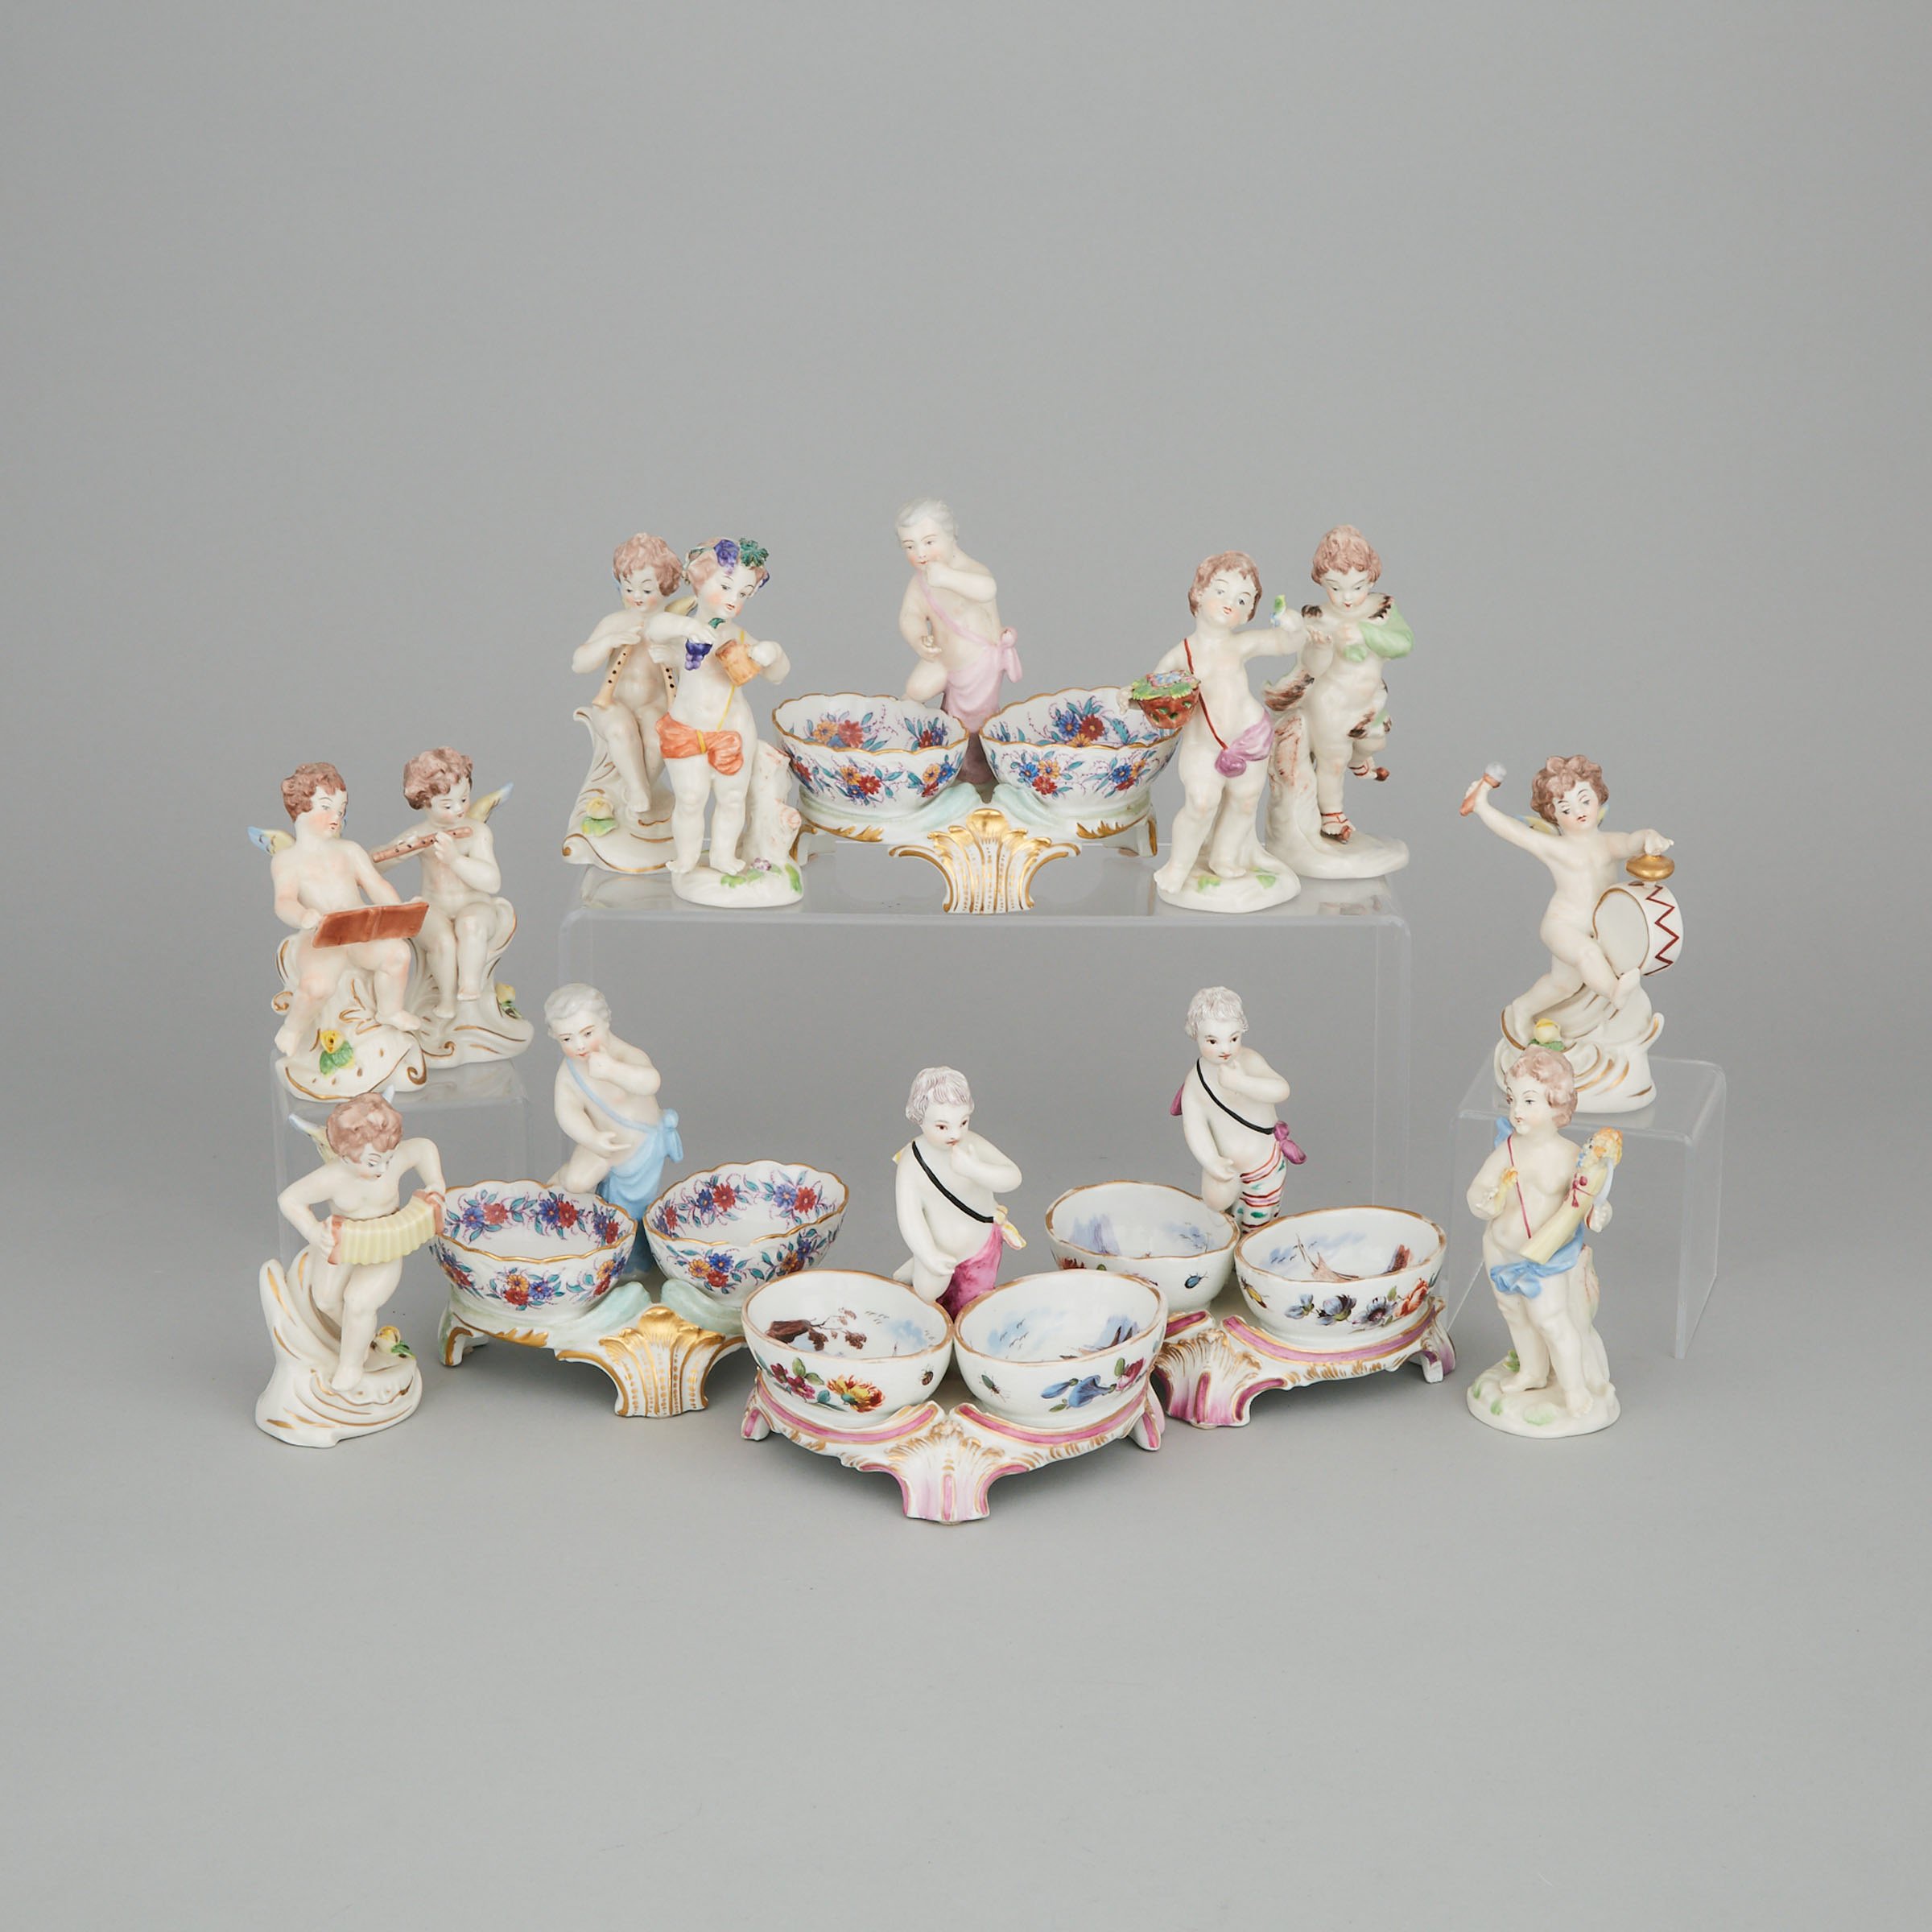 Two Pairs of Continental Porcelain Double Salt Cellars and Nine Small Figures, late 19th/20th century